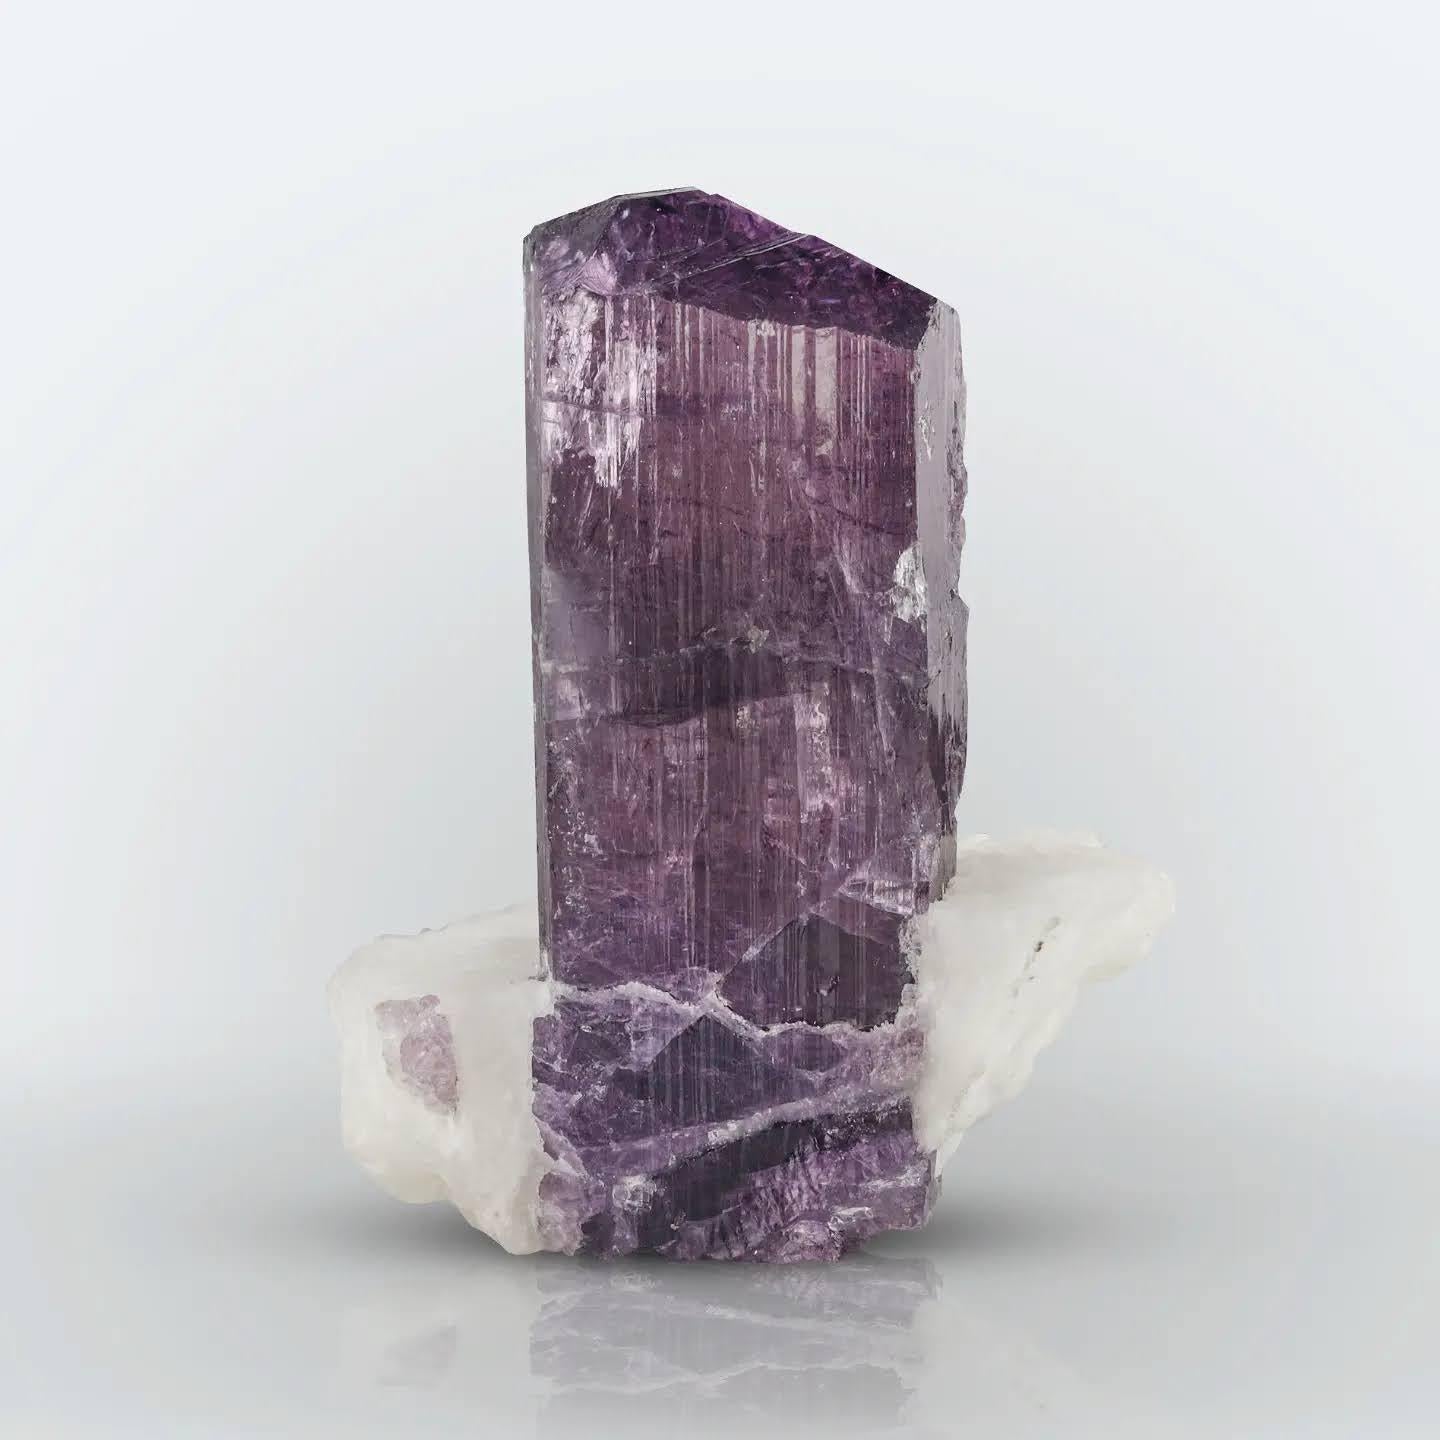 Dim: H: 8.7 x W: 7.2 x D: 6.2 cm 

Wt: 282 g

Specimen Type: Scapolite crystal on Calcite 

Treatment: Irradiated 

Color: Purple 





Purple Scapolite crystals on a backdrop of translucent Calcite create a stunning and captivating mineral